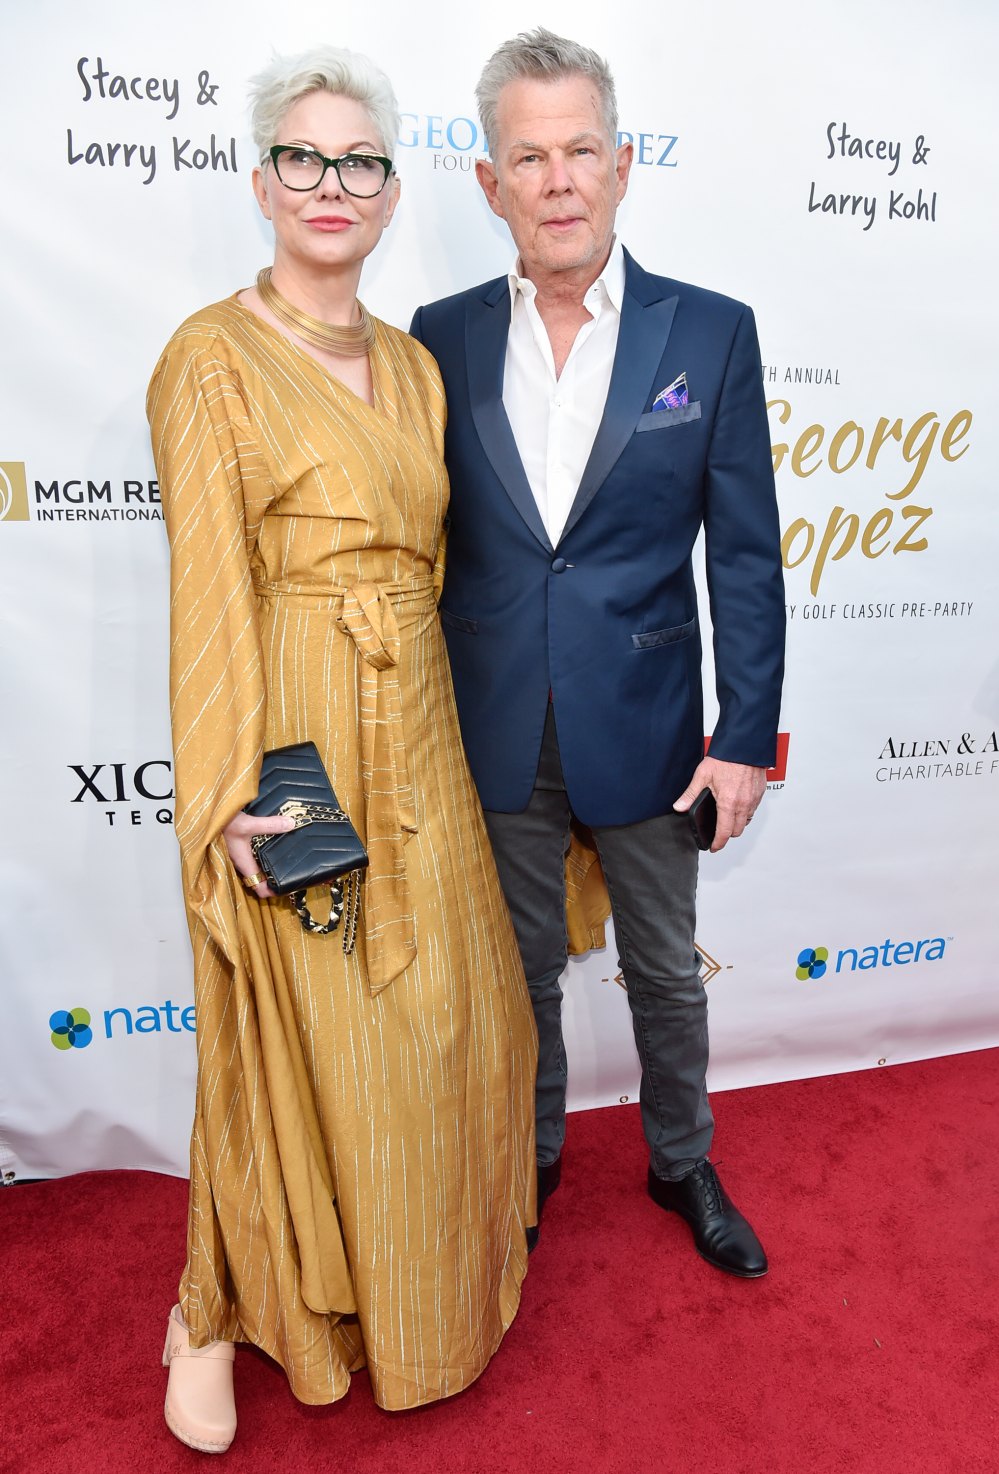 George Lopez Foundation's 15th Annual Celebrity Golf Tournament - Pre-Party. David and Amy Foster